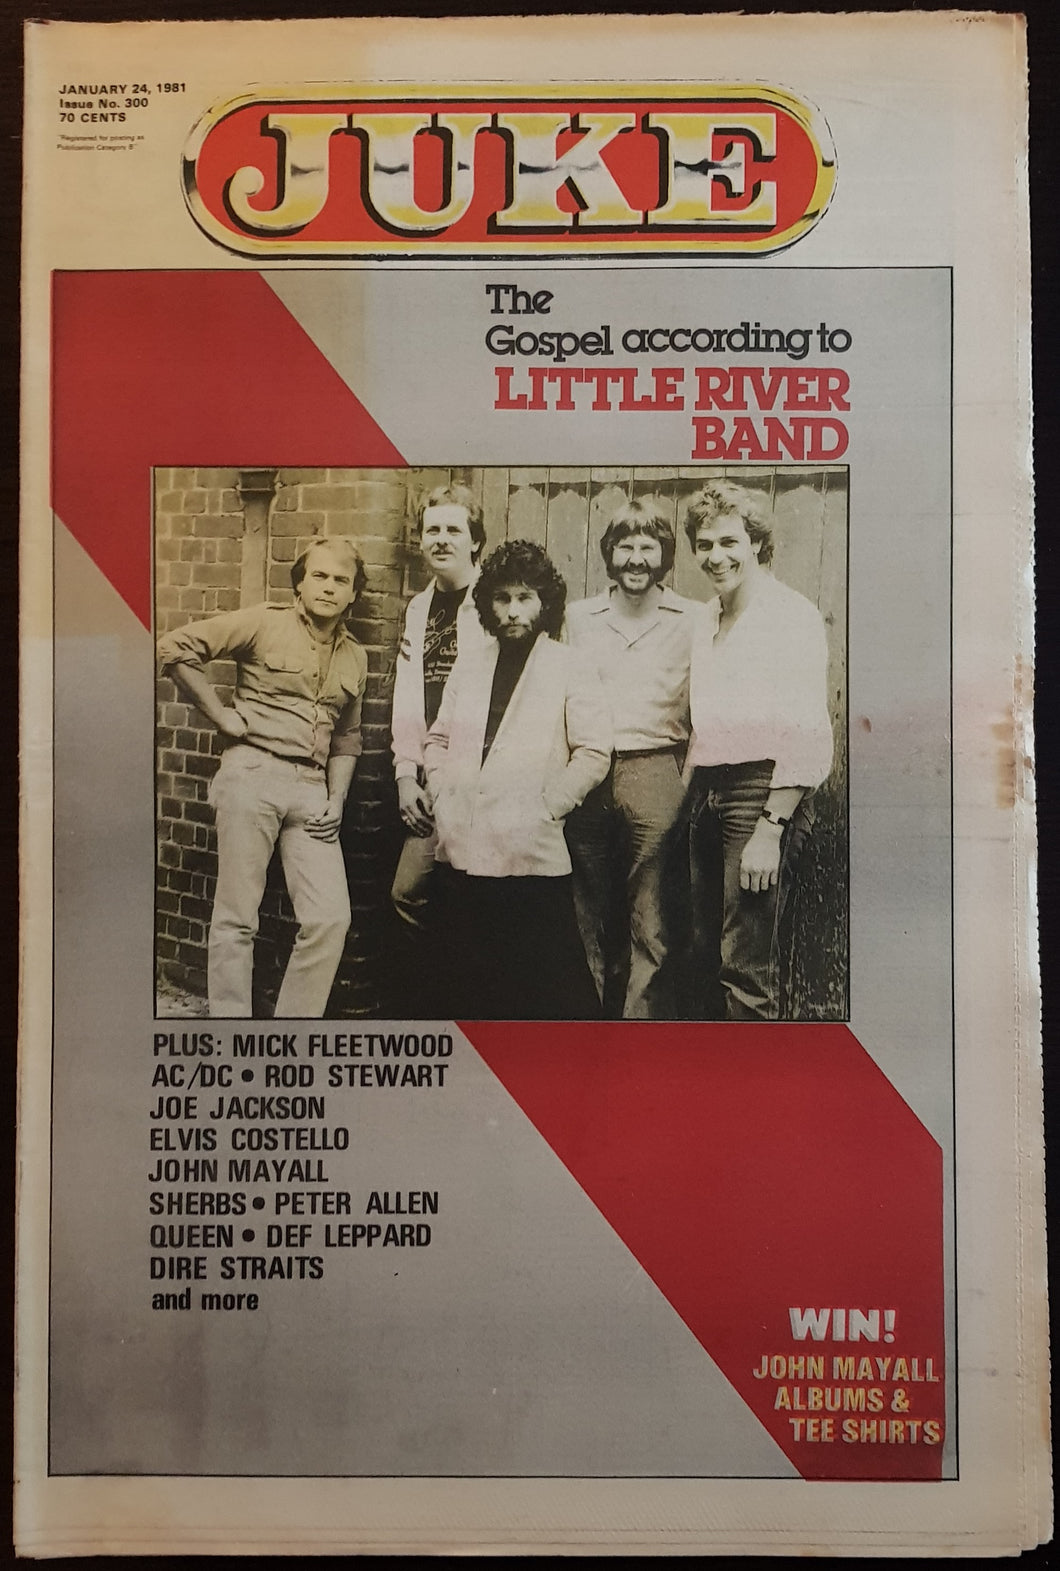 Little River Band - Juke January 24, 1981. Issue No.300